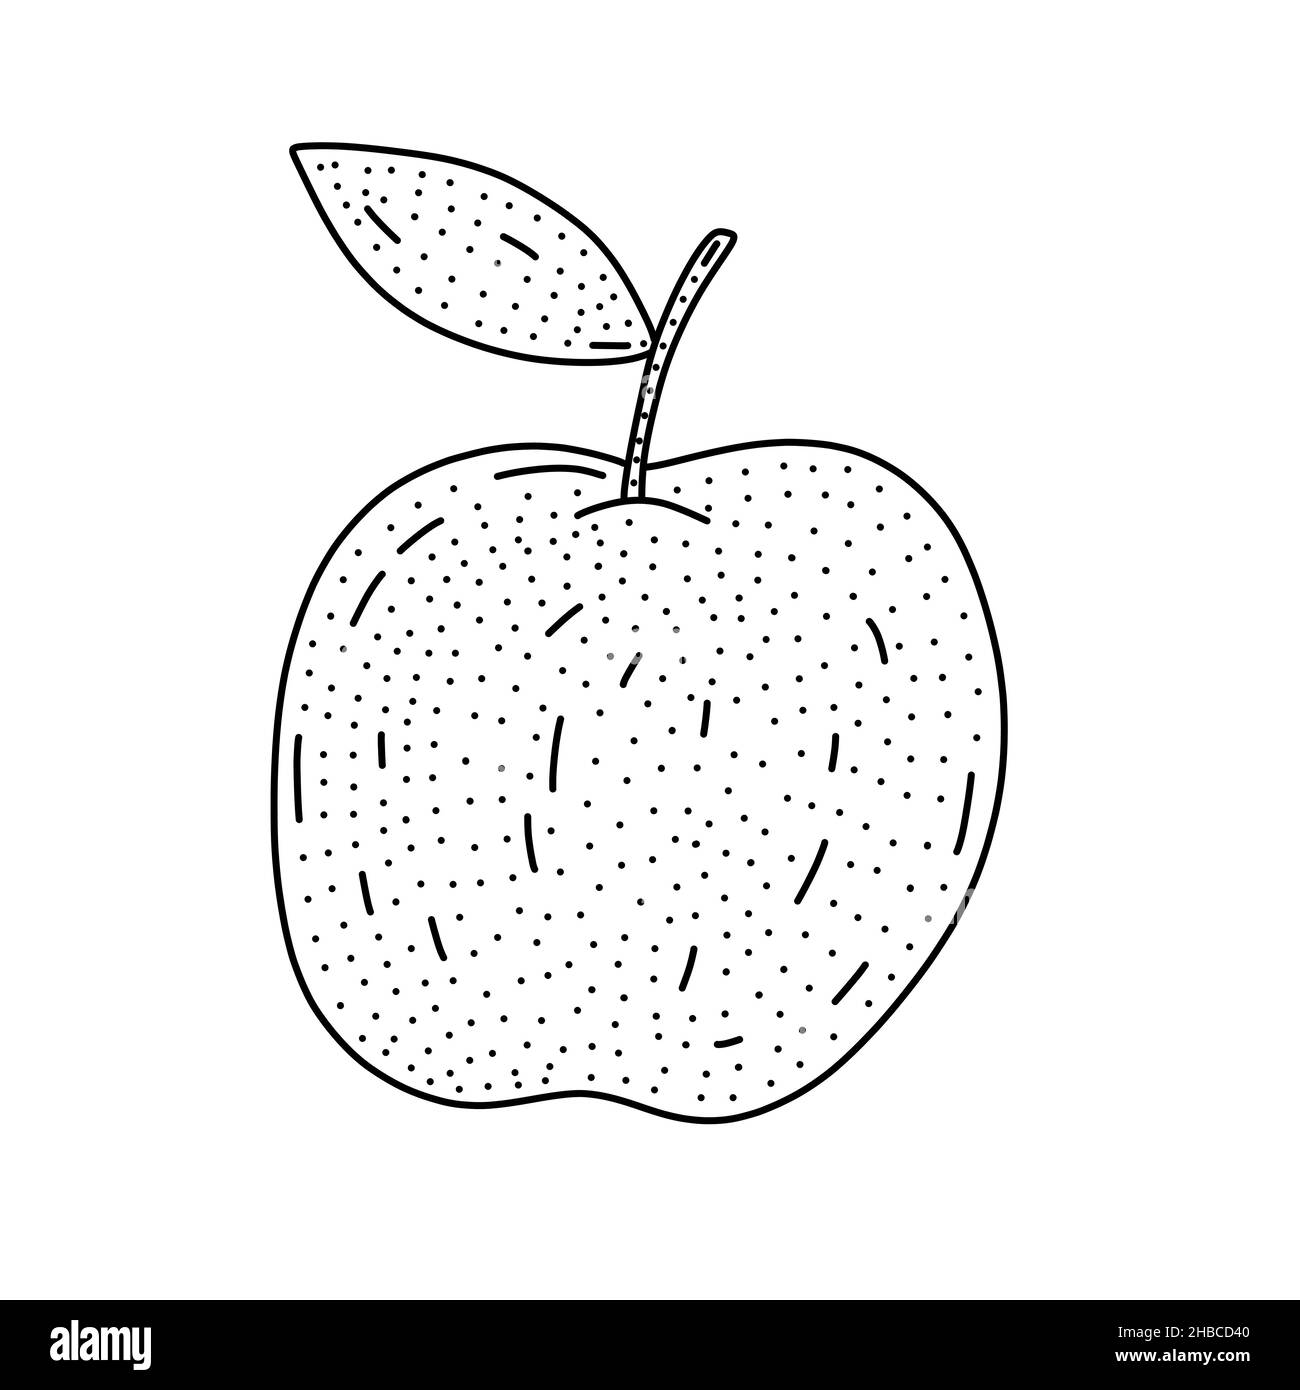 Hand drawn apple in doodle style. Isolated on white vector illustration Stock Vector